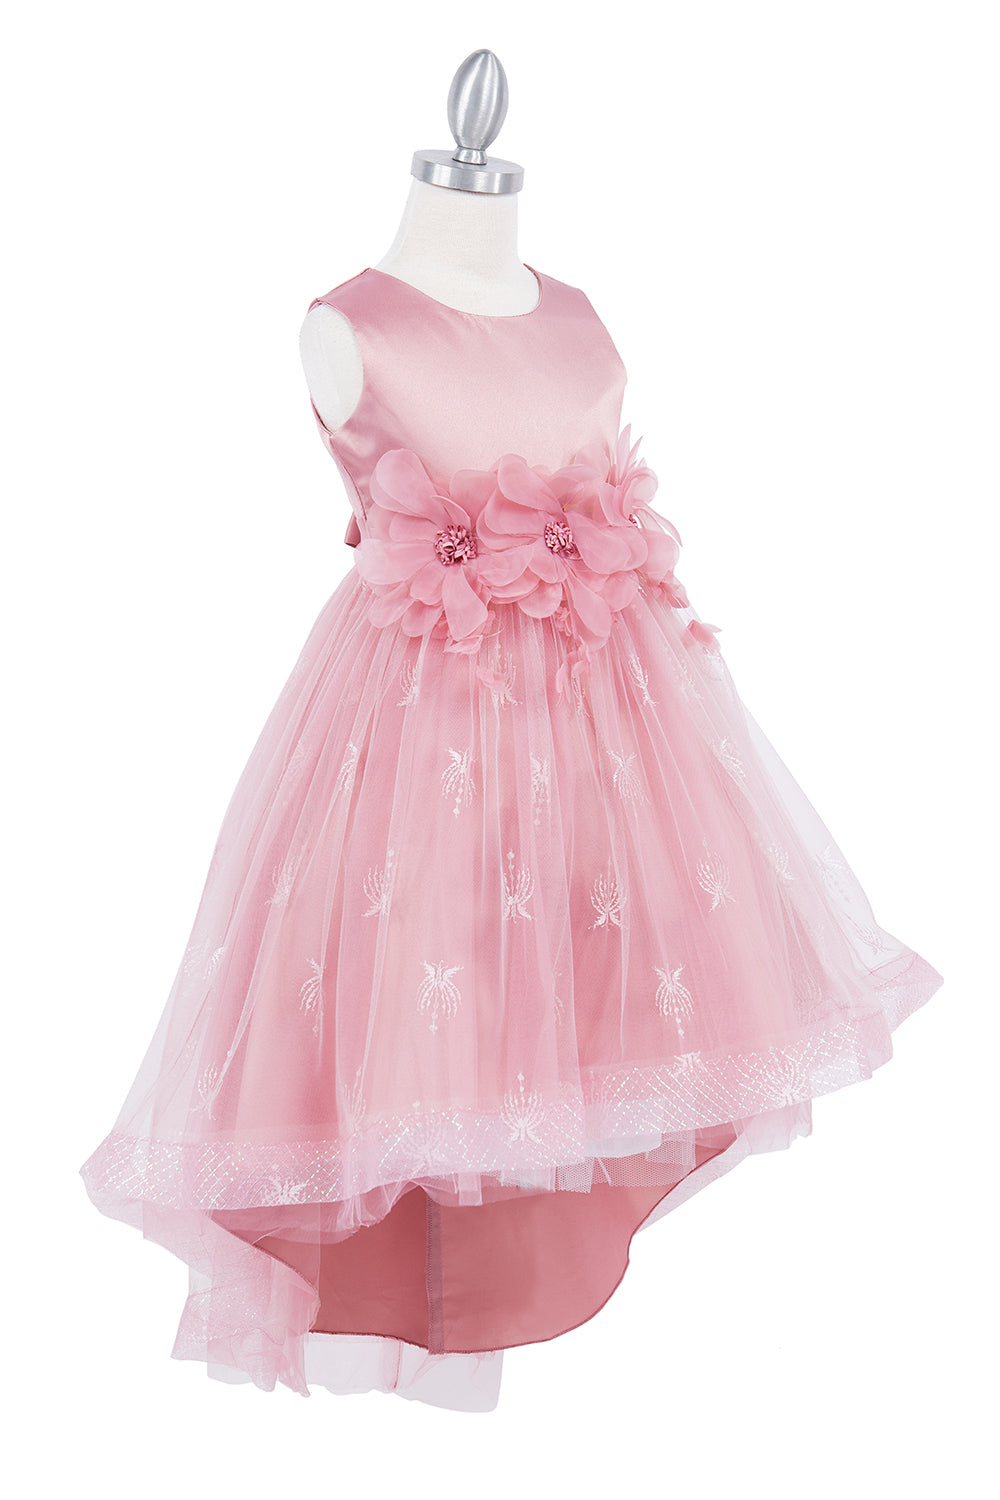 Cinderella Couture Sleeveless Floral Lace Flower Girl Dress